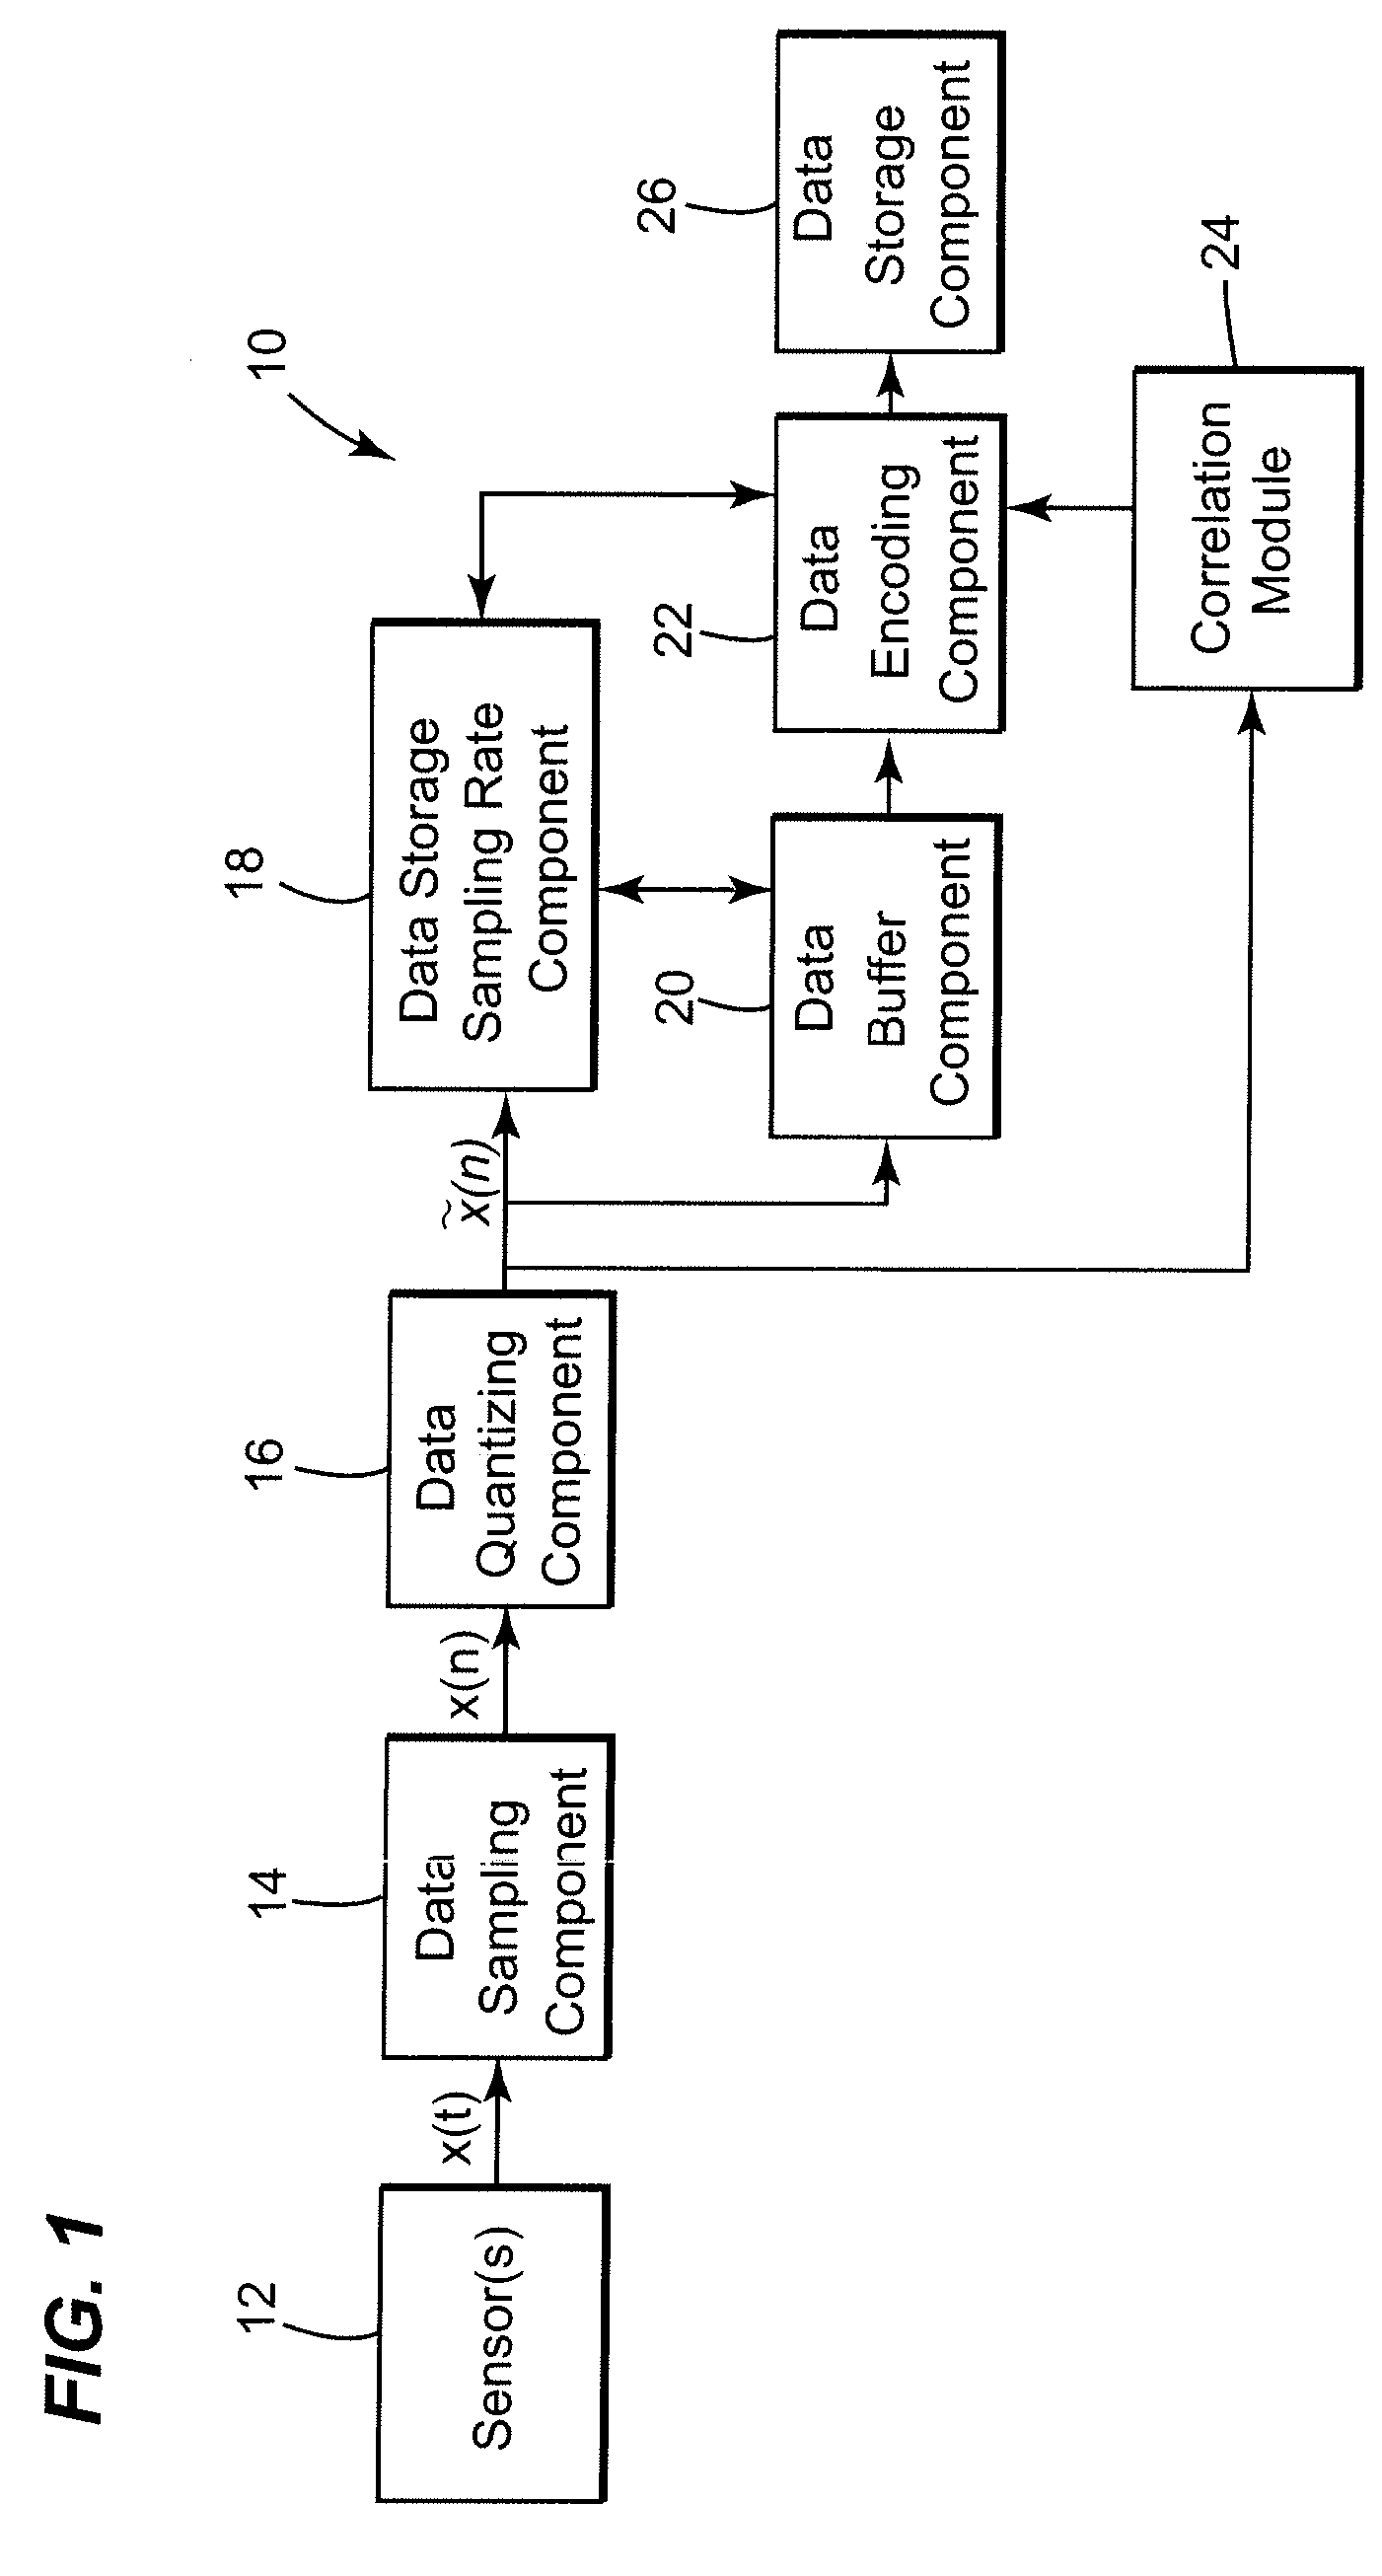 Method and system for efficient data collection and storage